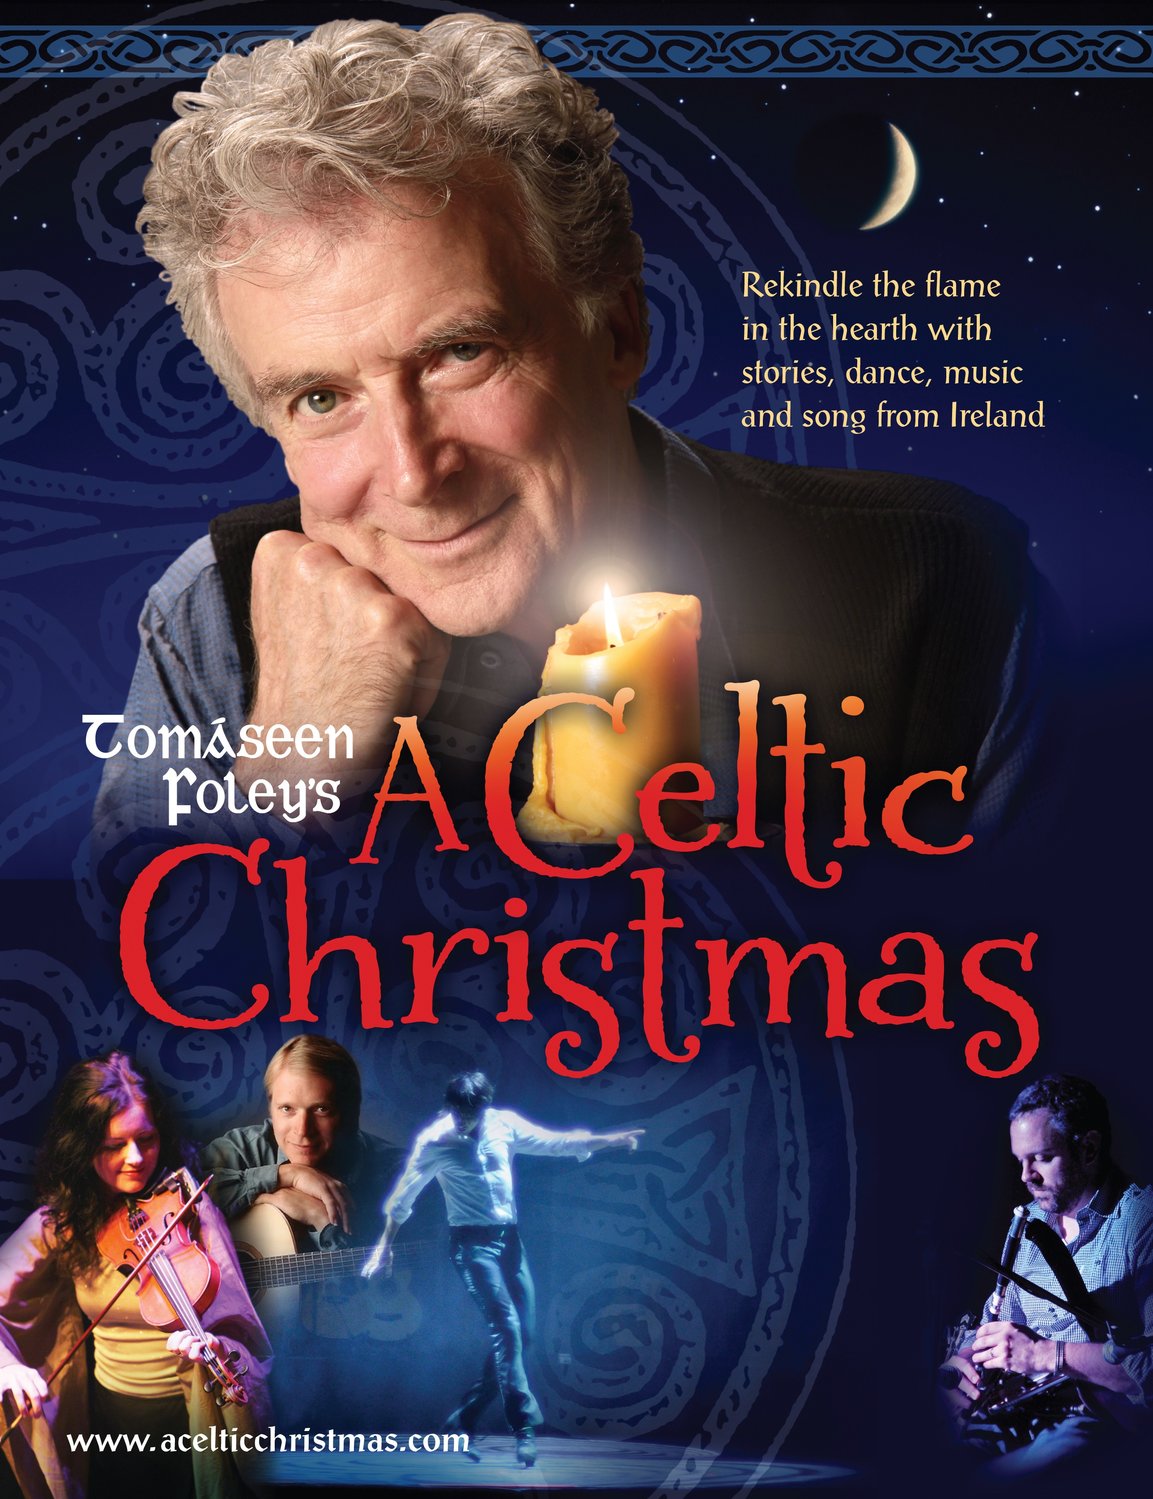 Irish storyteller Tomáseen Foley appears in “A Celtic Christmas” at the Madison Theatre on Dec. 1.